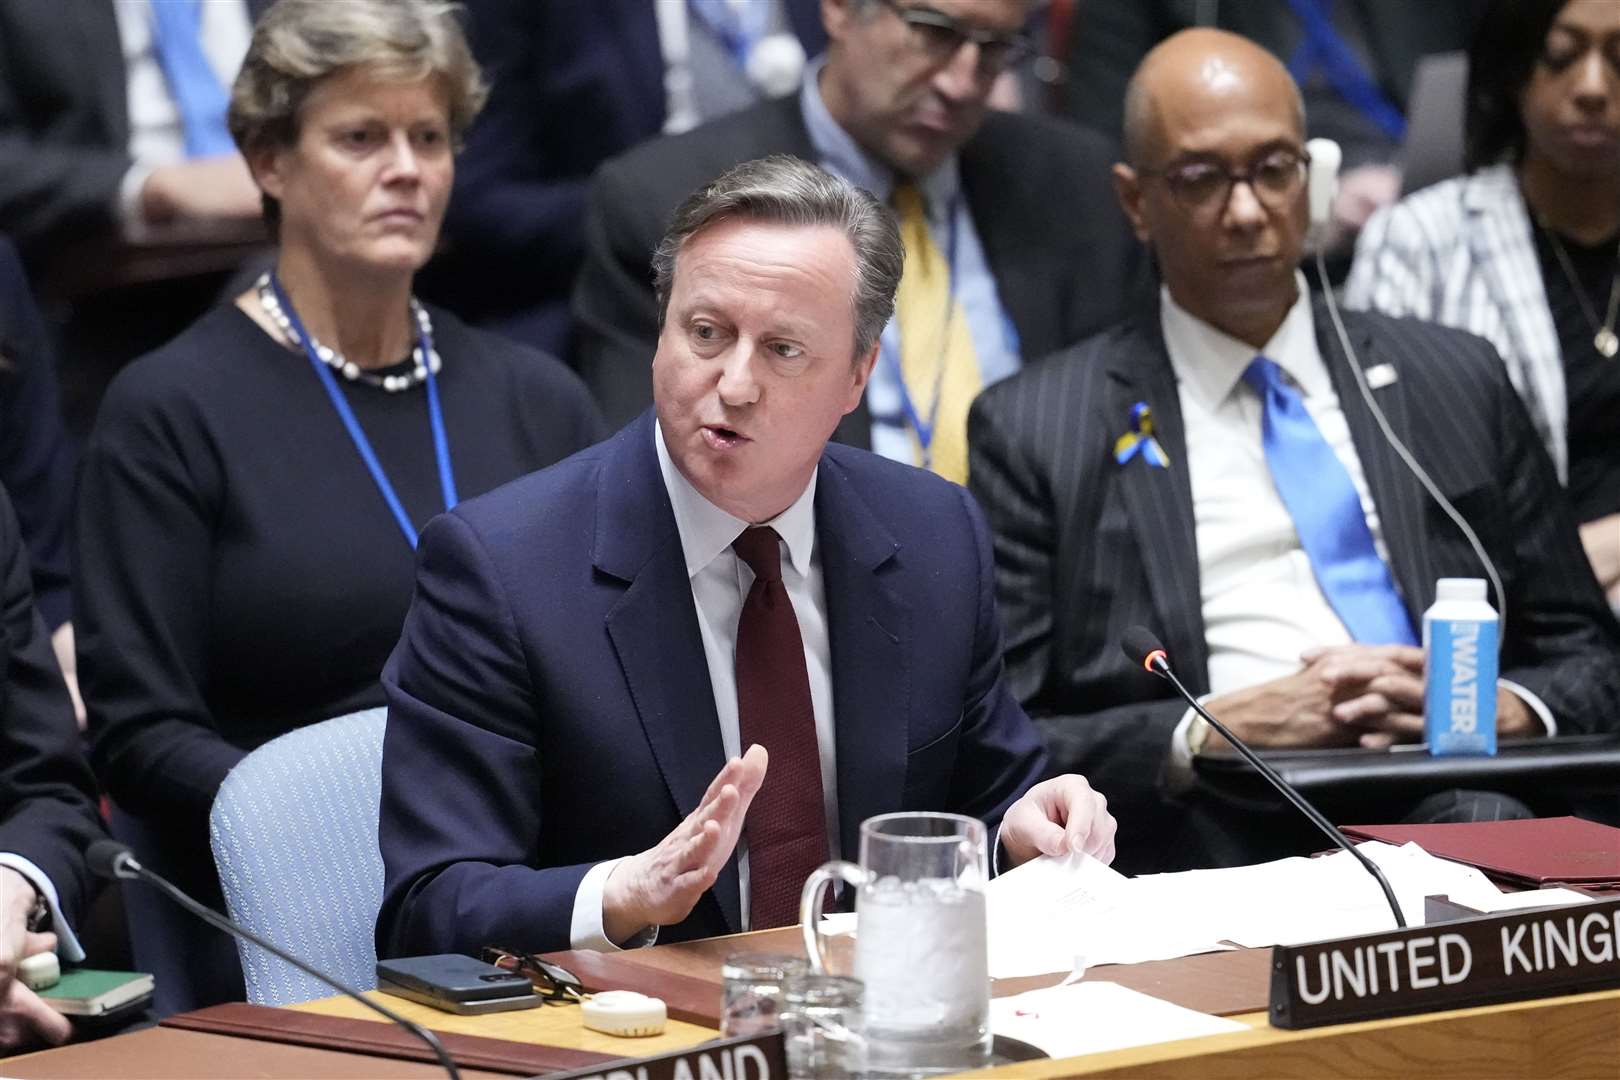 David Cameron addresses a Security Council meeting on maintenance of peace and security of Ukraine at the United Nations headquarters in New York (Mary Altaffer/AP)